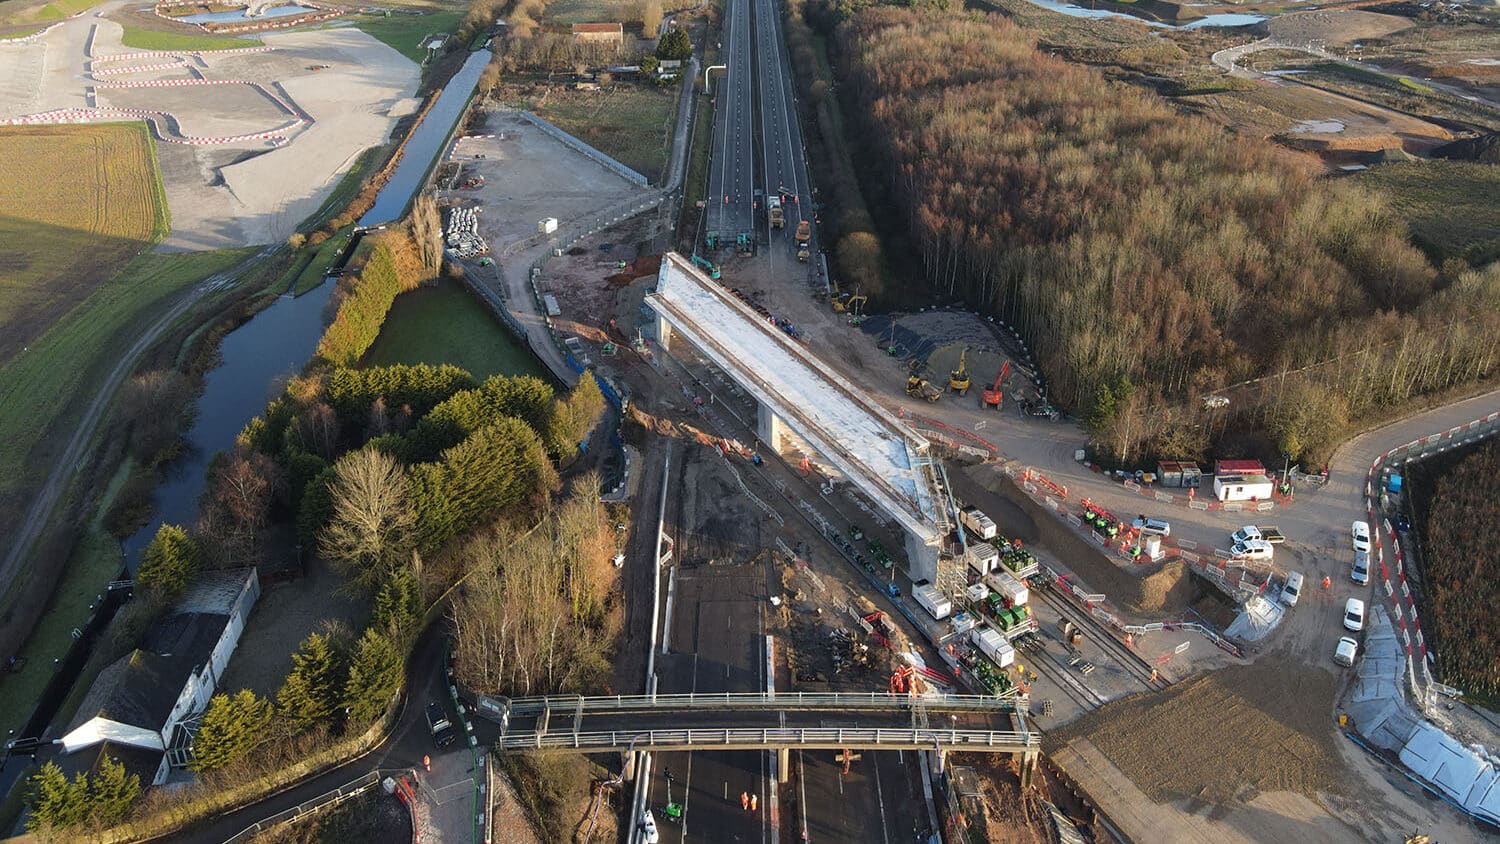 Drone images of the Marston Box bridge after it was successfully installed over the M42 motorway in Warwickshire